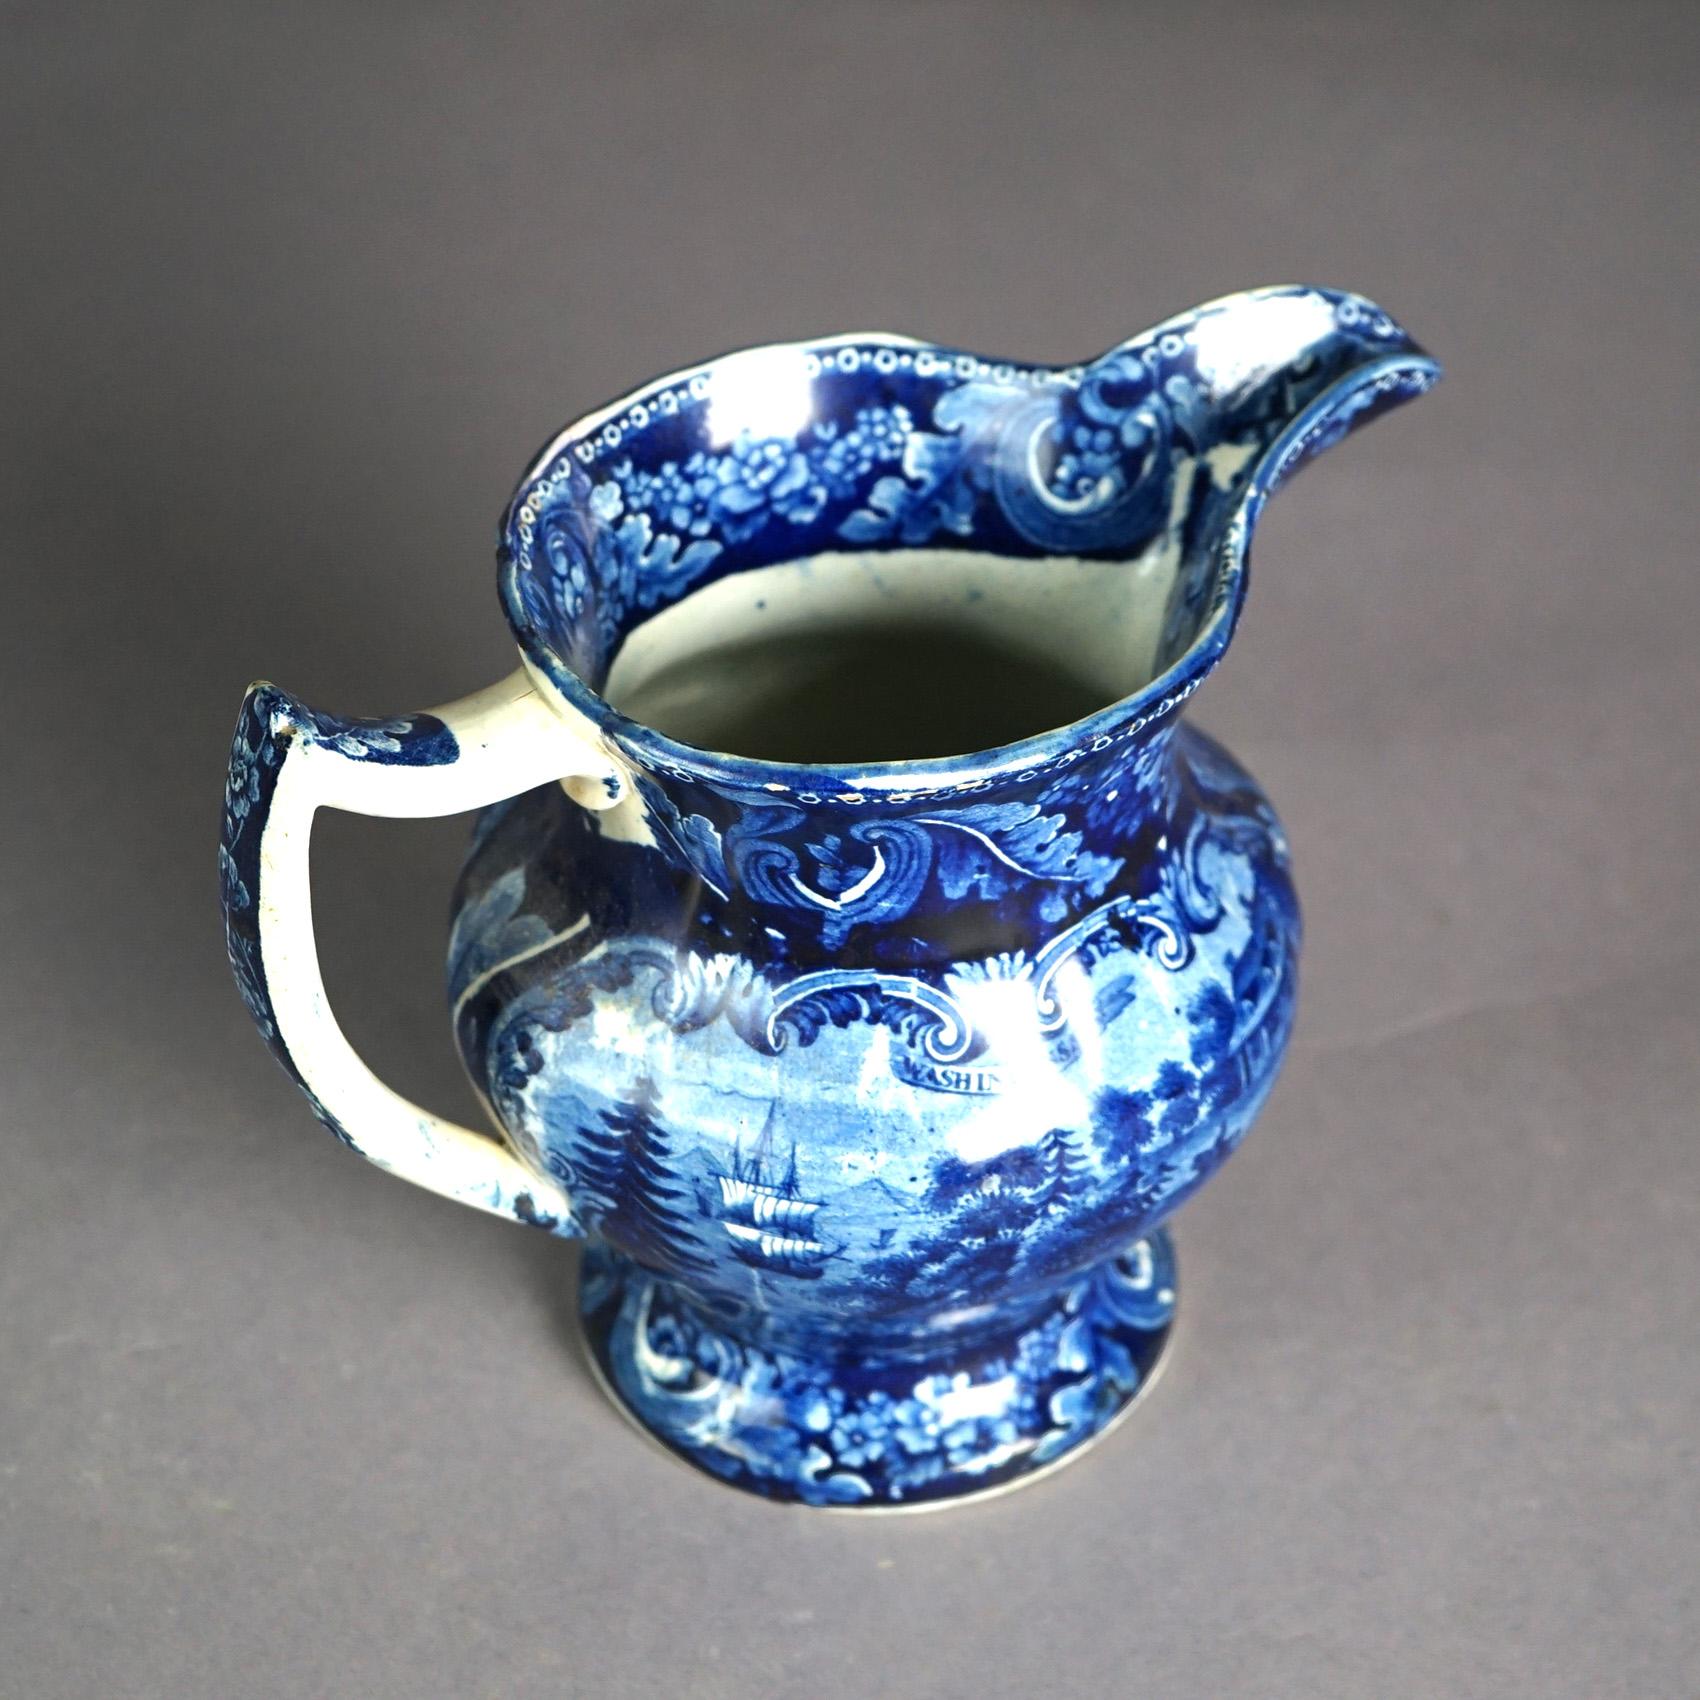 Antique Staffordshire Pottery Flow Blue Historical Pitcher & Cup with Ship 19thC 5